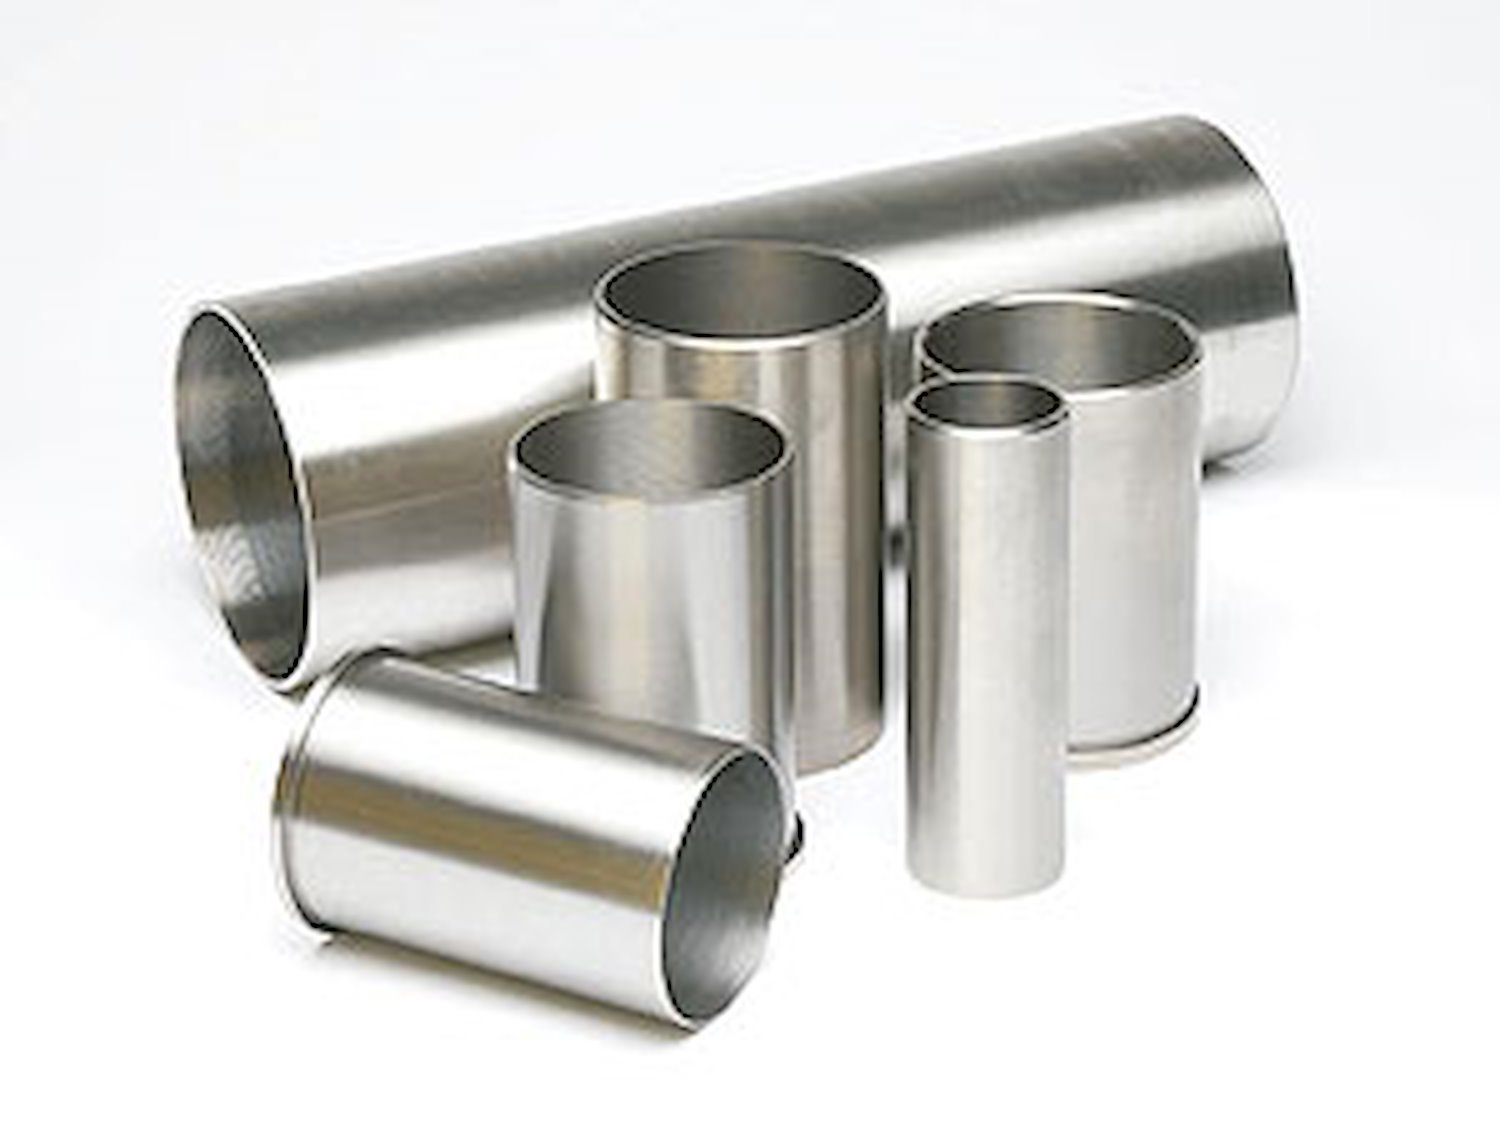 Cylinder Sleeve Bore: 2.5420" Length: 5-3/16" Wall Thickness: 3/32"